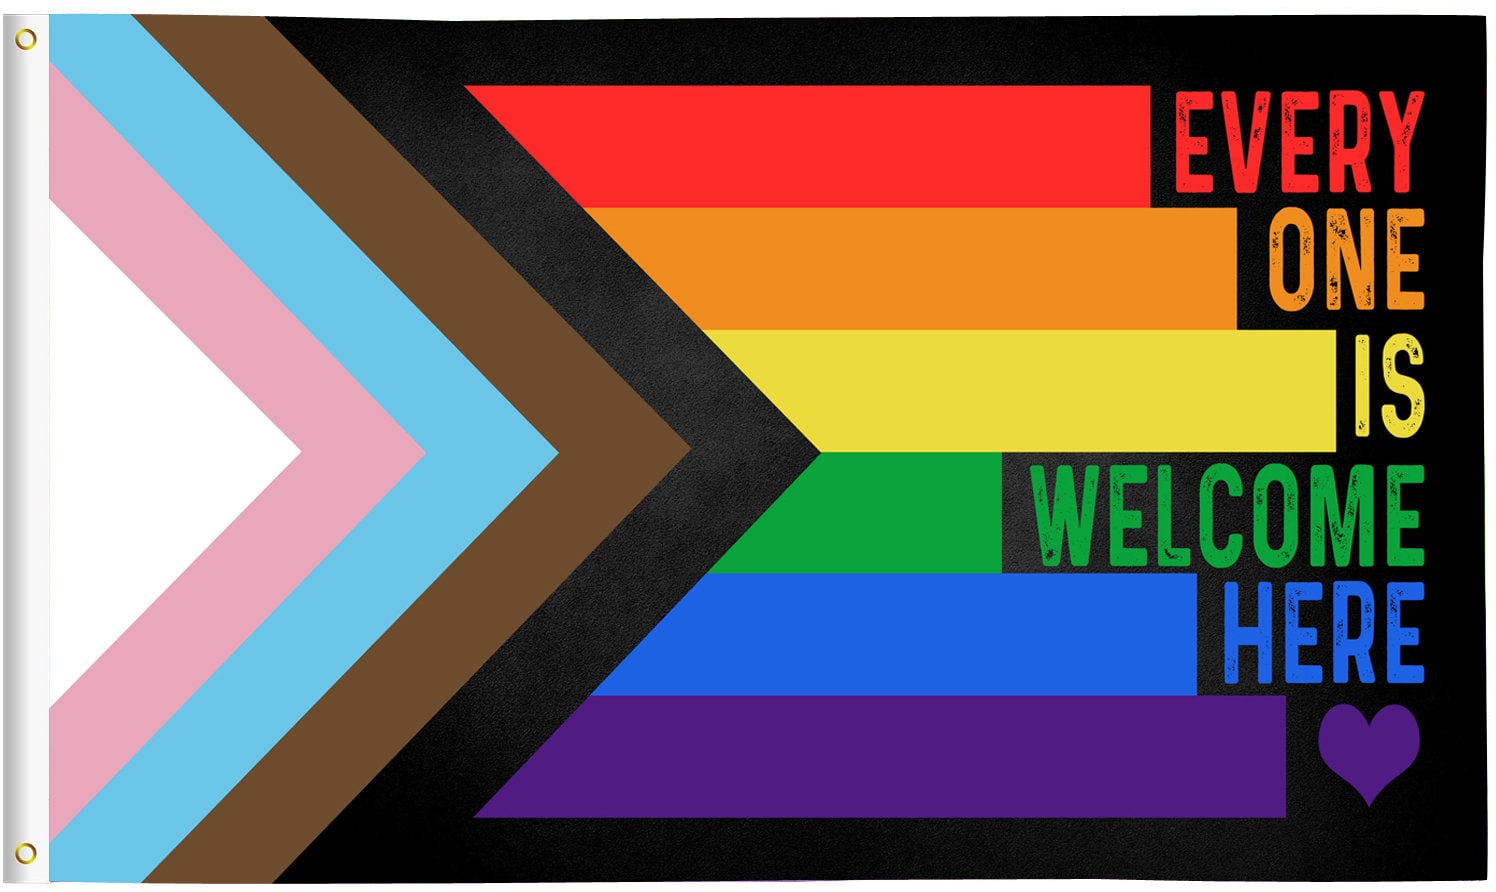 The Heterosexual Pride 3X5 Ft Flags for Parade, Straight Ally Pride Banner  Flag Sign for Indoor Outdoor Decoration